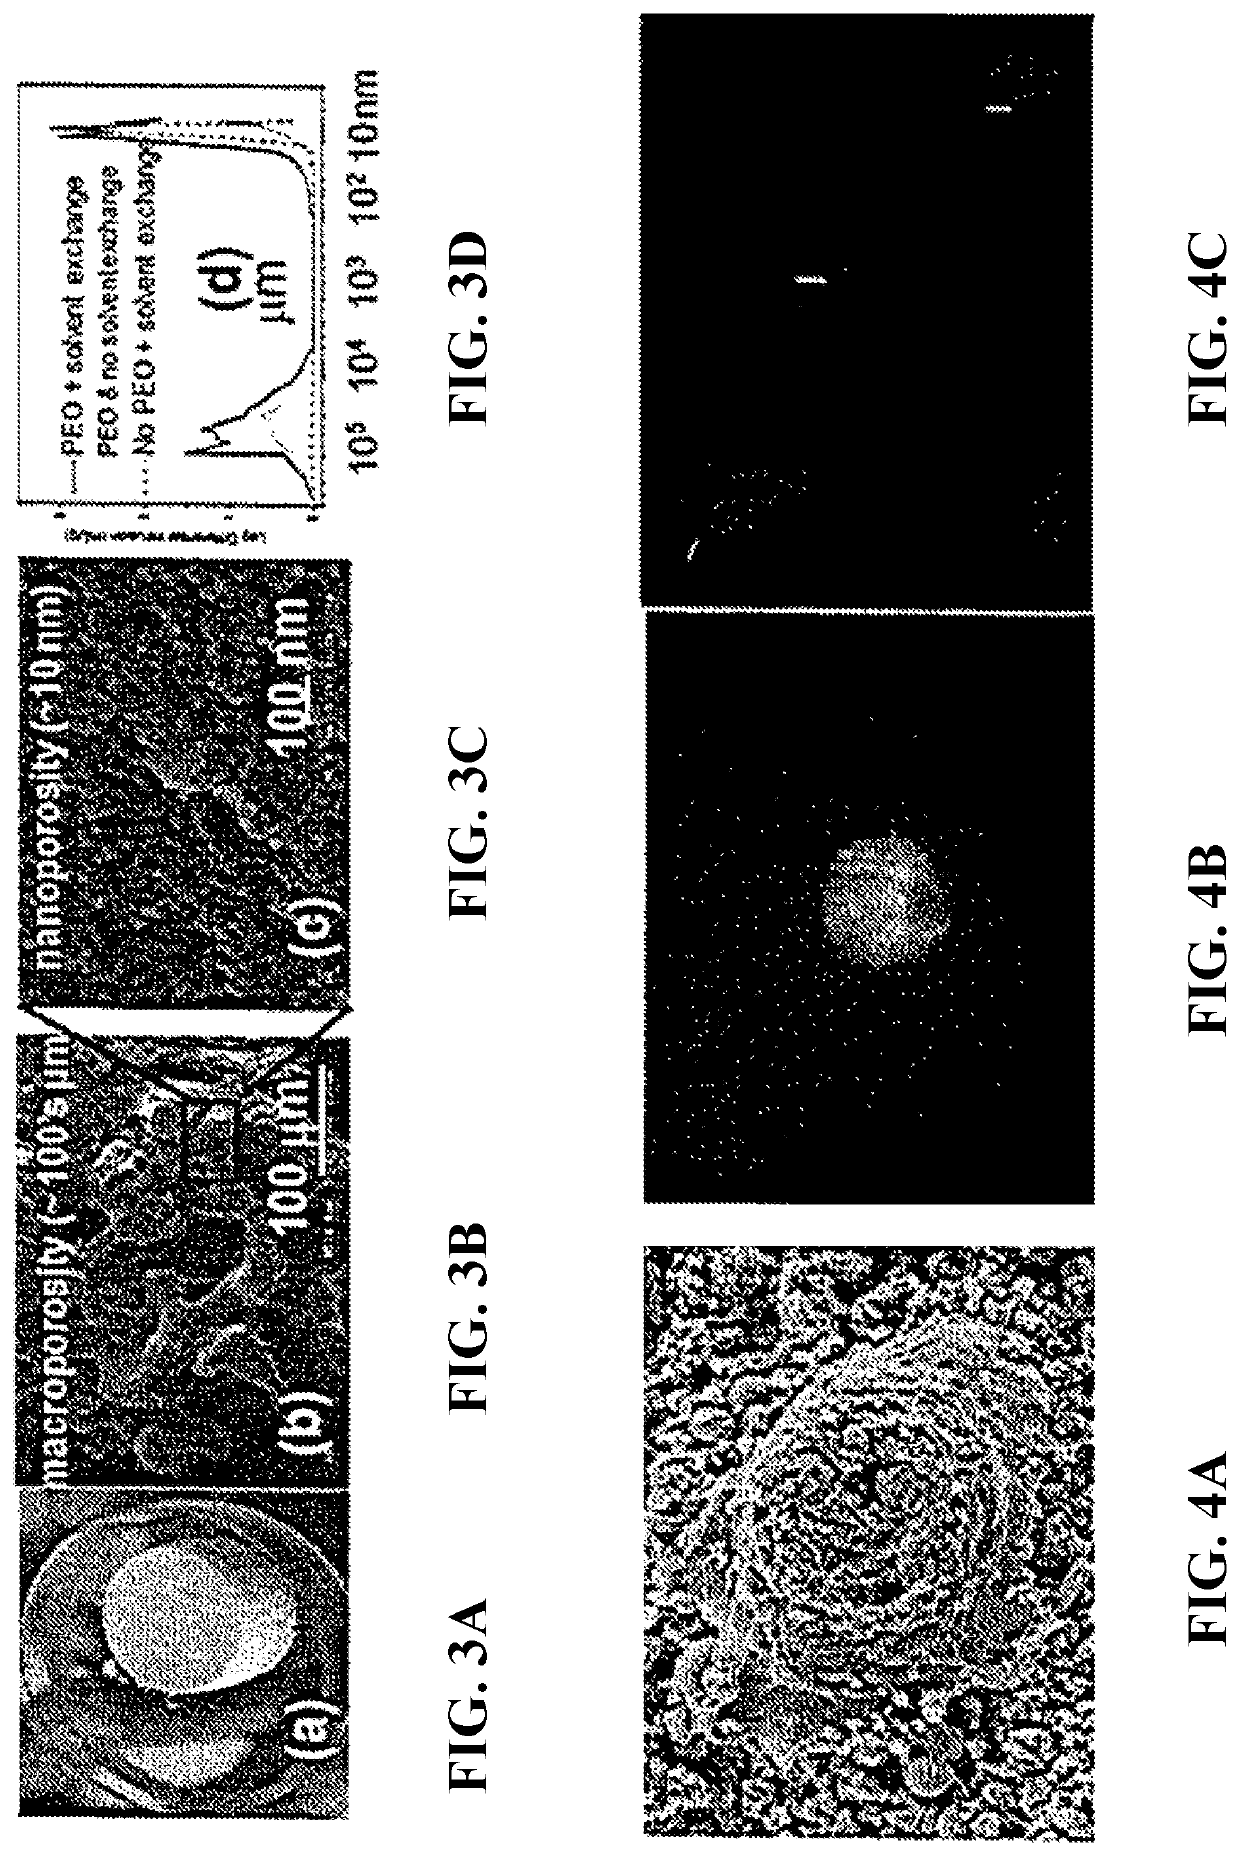 Scaffolds for uterine cell growth